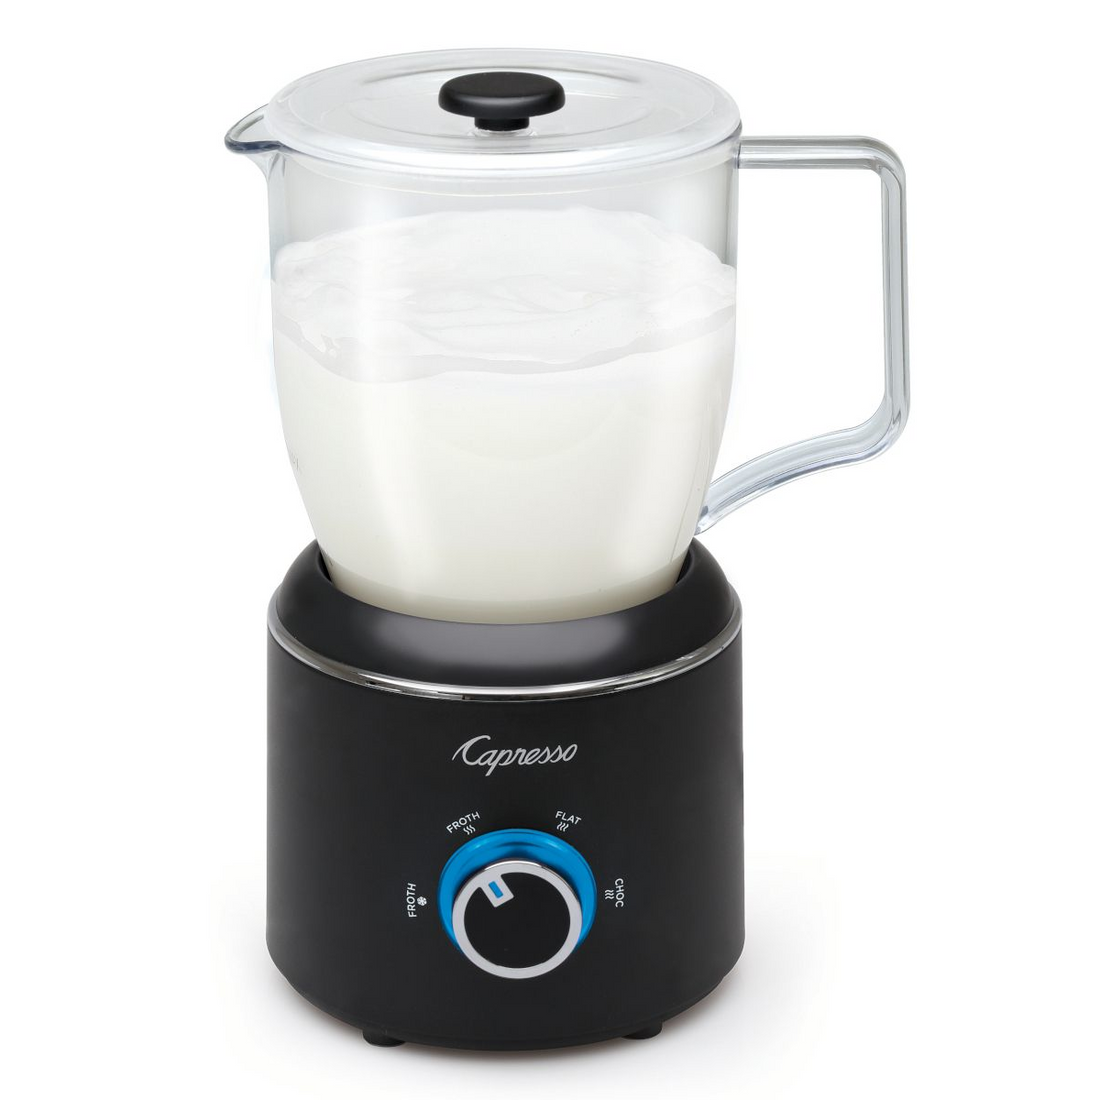 Capresso Froth Control frothing milk.